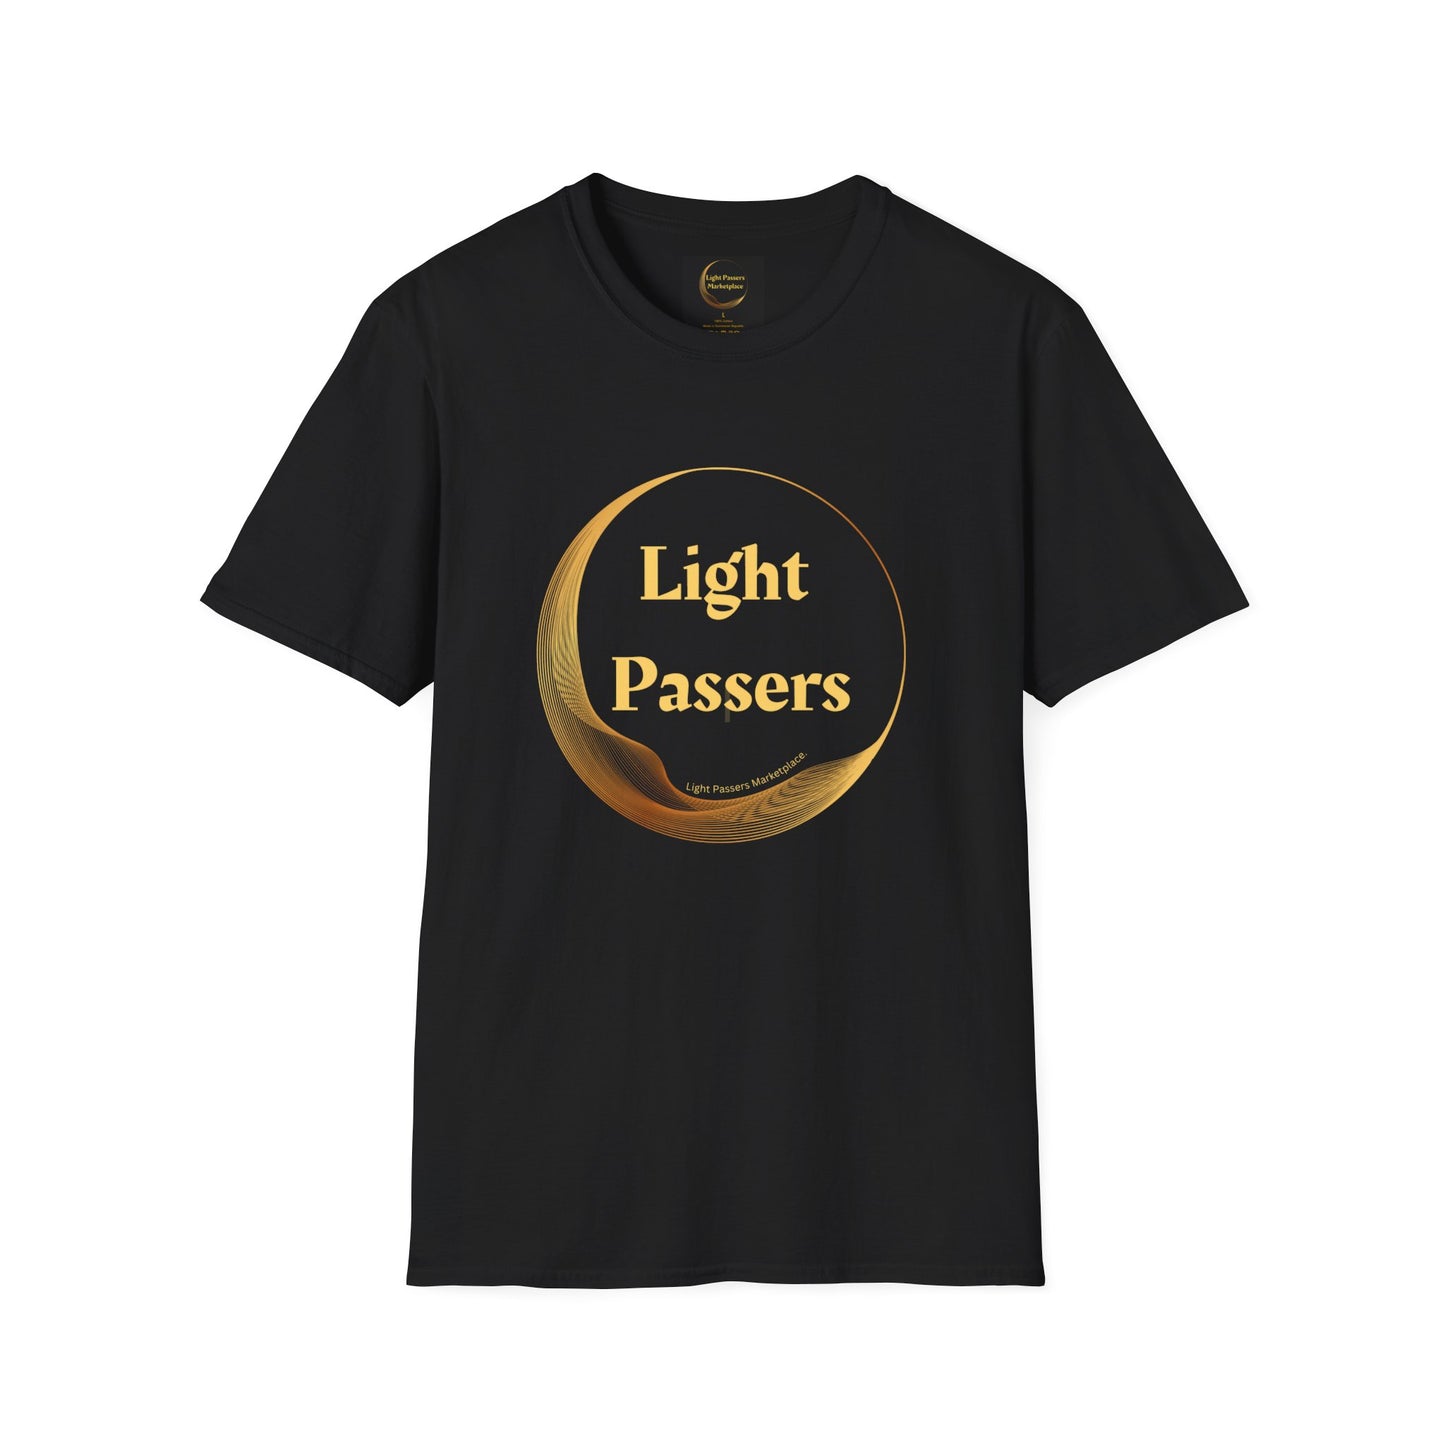 A black t-shirt featuring a gold logo design, crafted from 100% cotton for a classic fit. No side seams for added comfort. Ideal for casual fashion with personalized style.